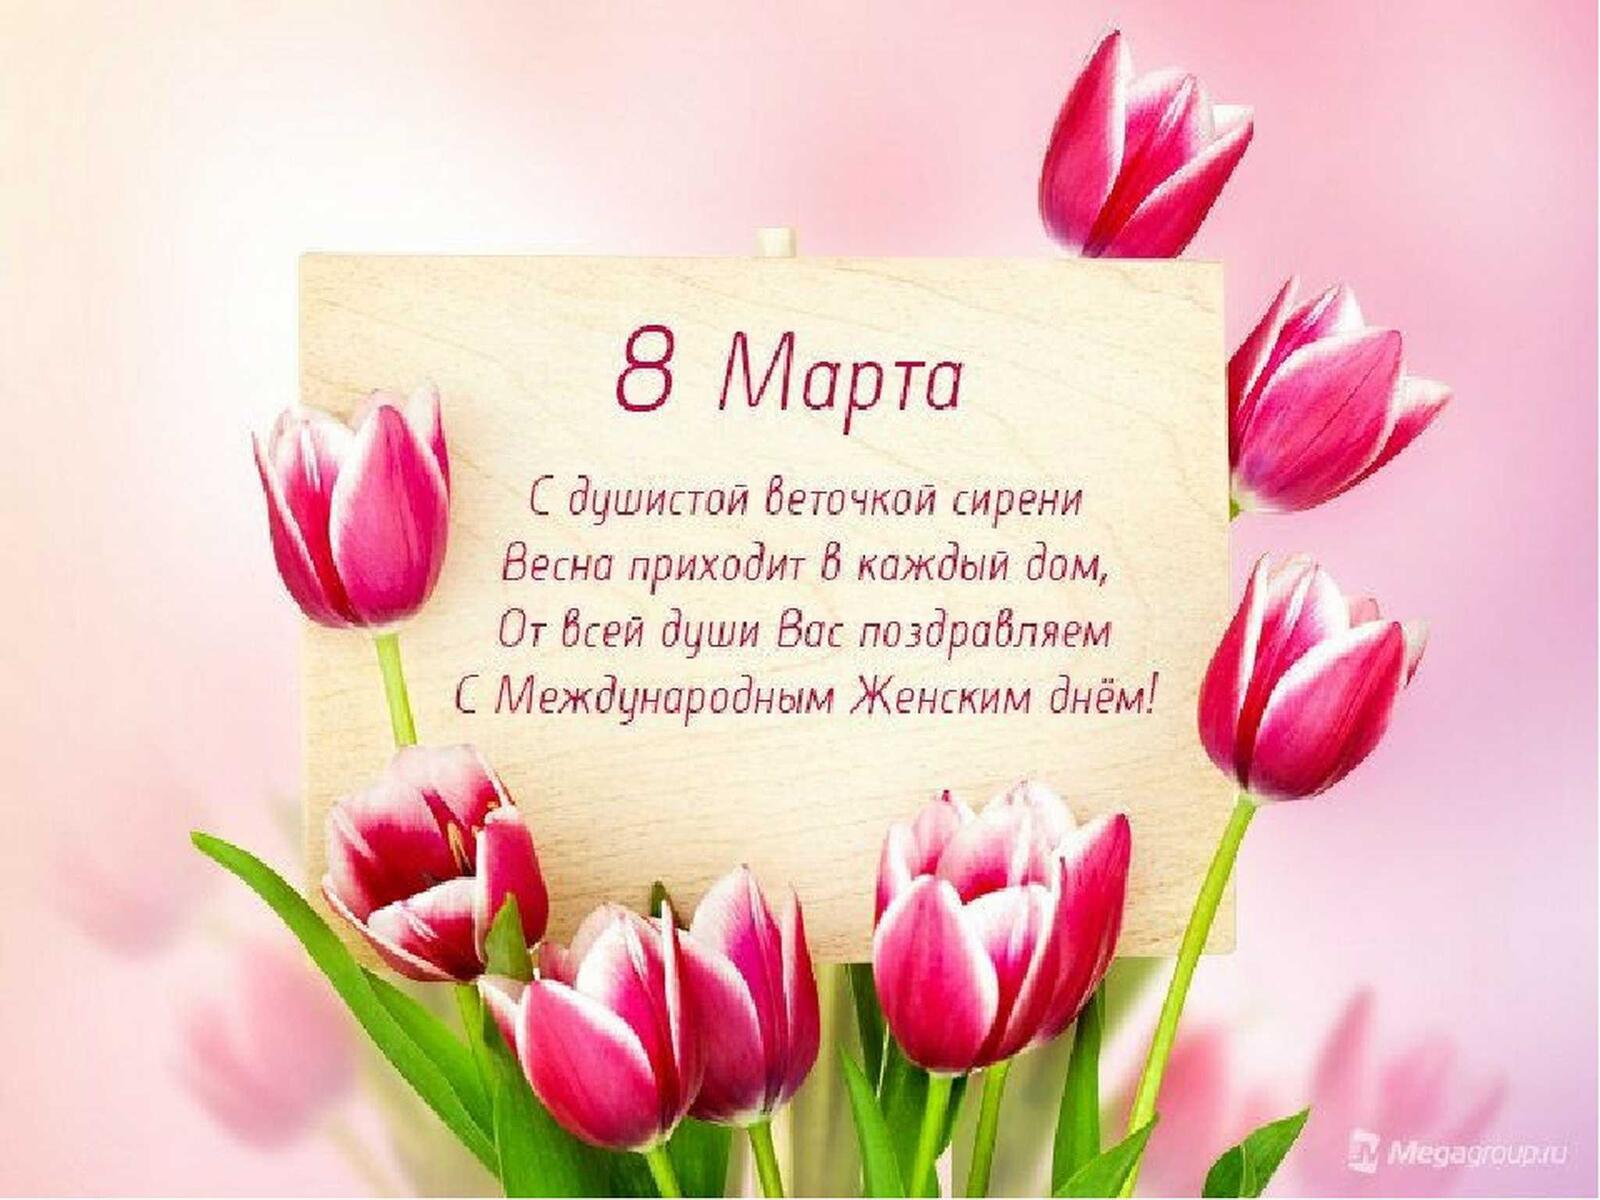 Congratulations on March 8 and pink tulips